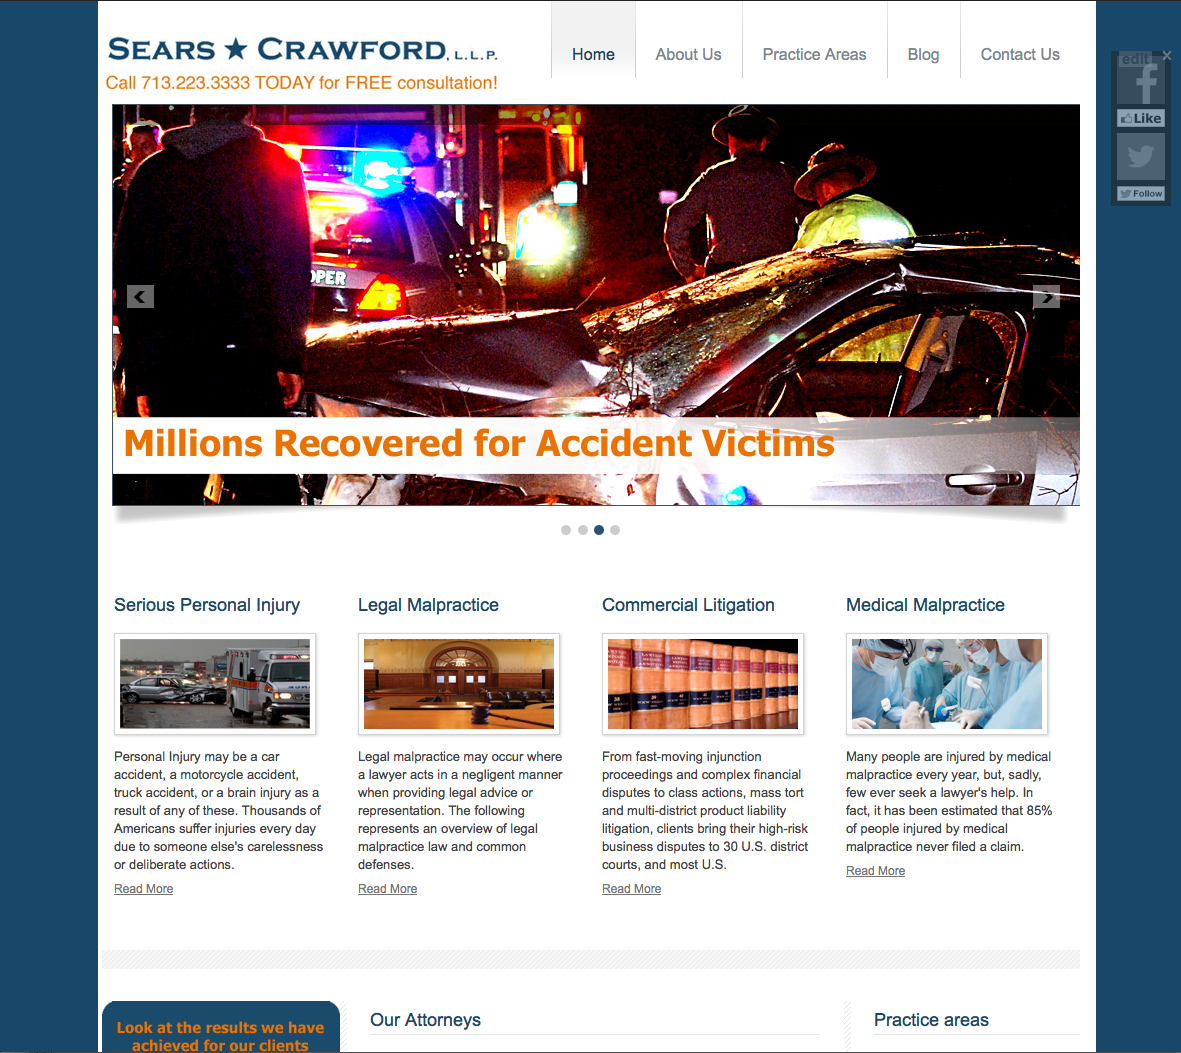 EMC Advertising Launches... "Sears Crawford Attorneys at Law" out of Houston, Texas!